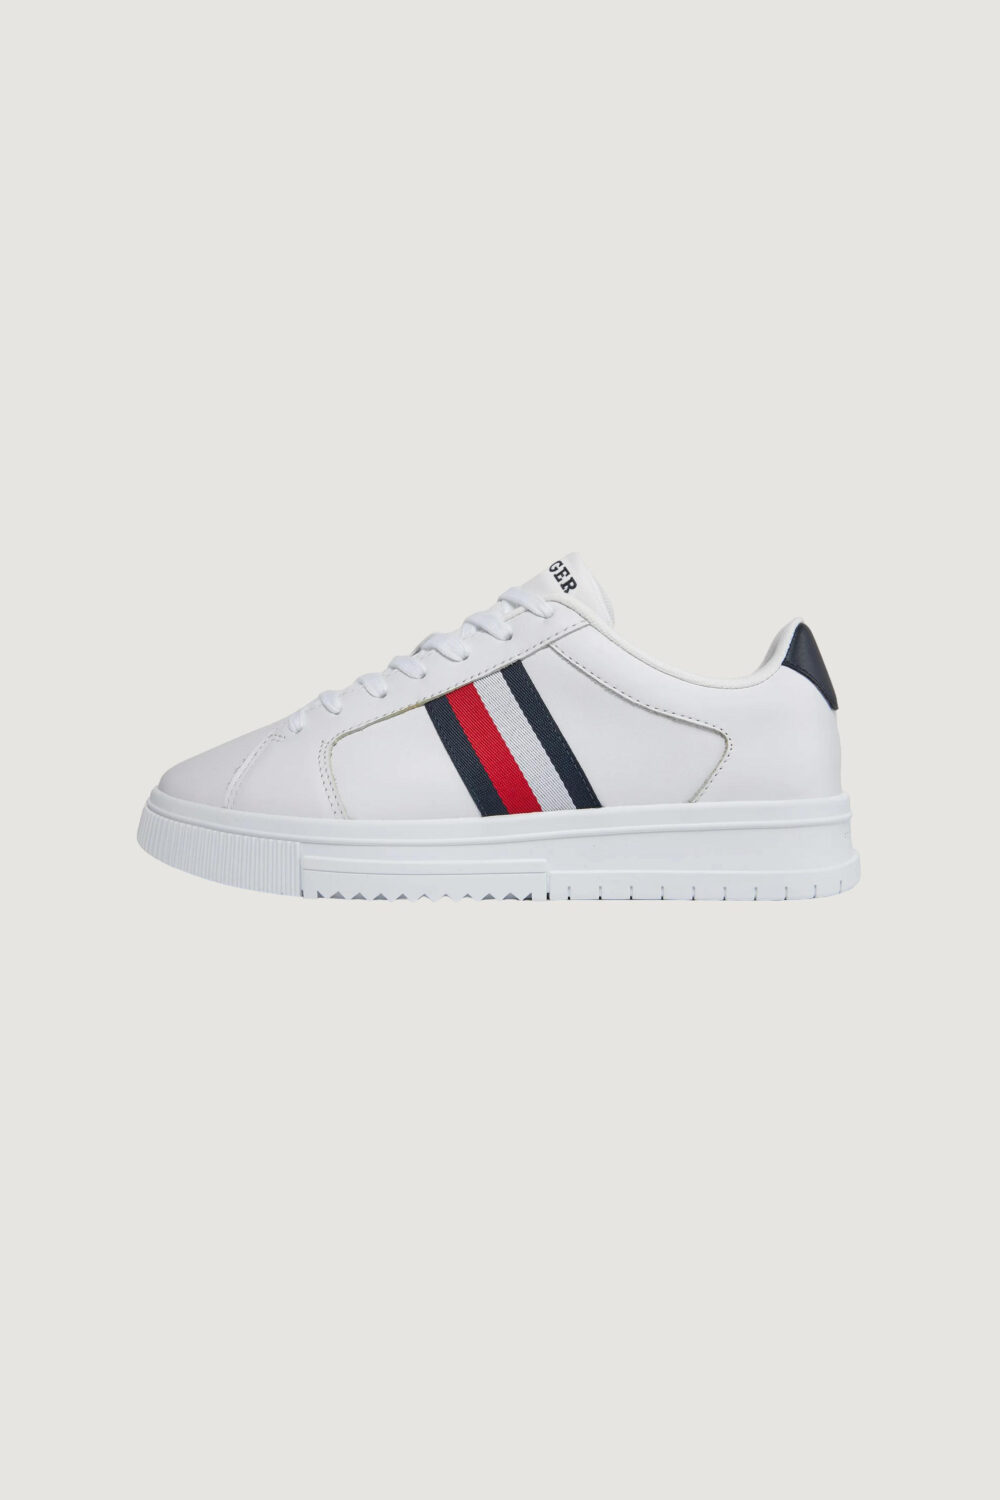 Sneakers Tommy Hilfiger SUPERCUP LTH STRIPES Bianco - Foto 2